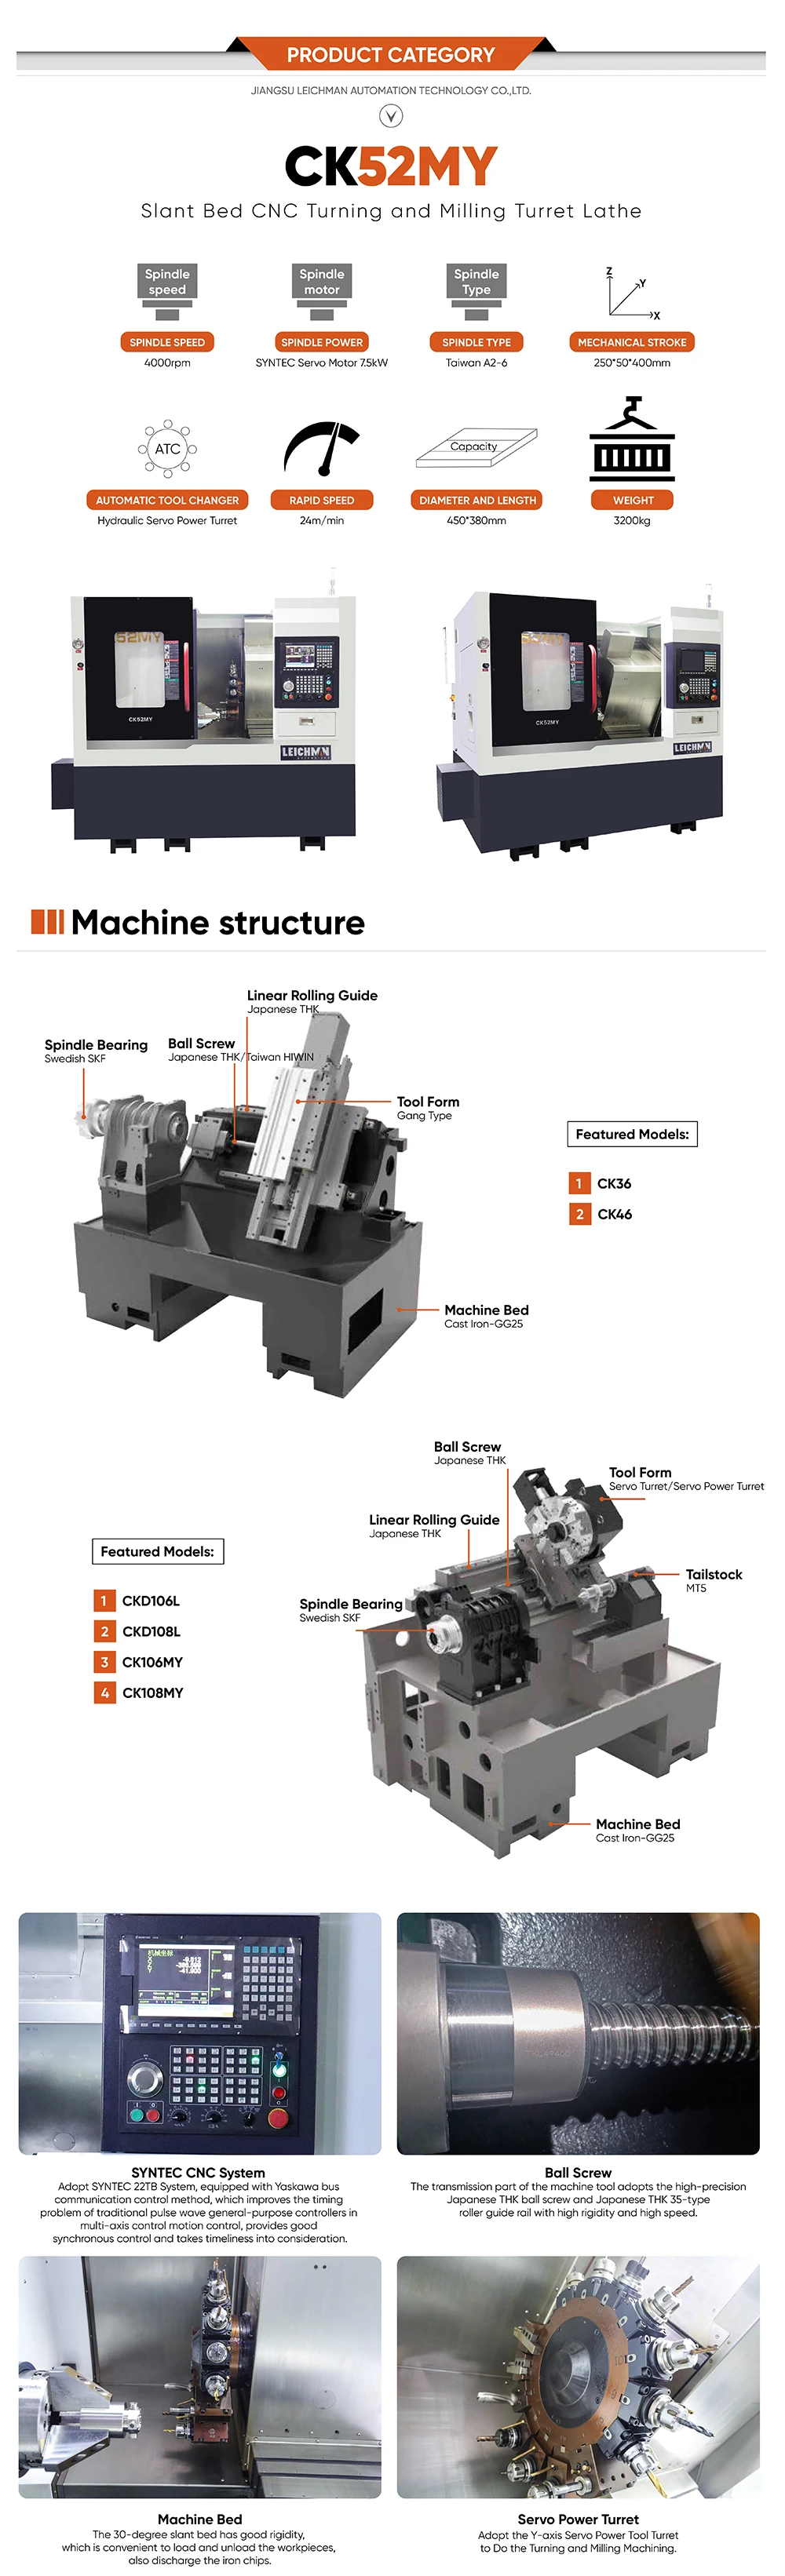 High Precision CNC turning and milling machine lathe with slant bed and live tooling